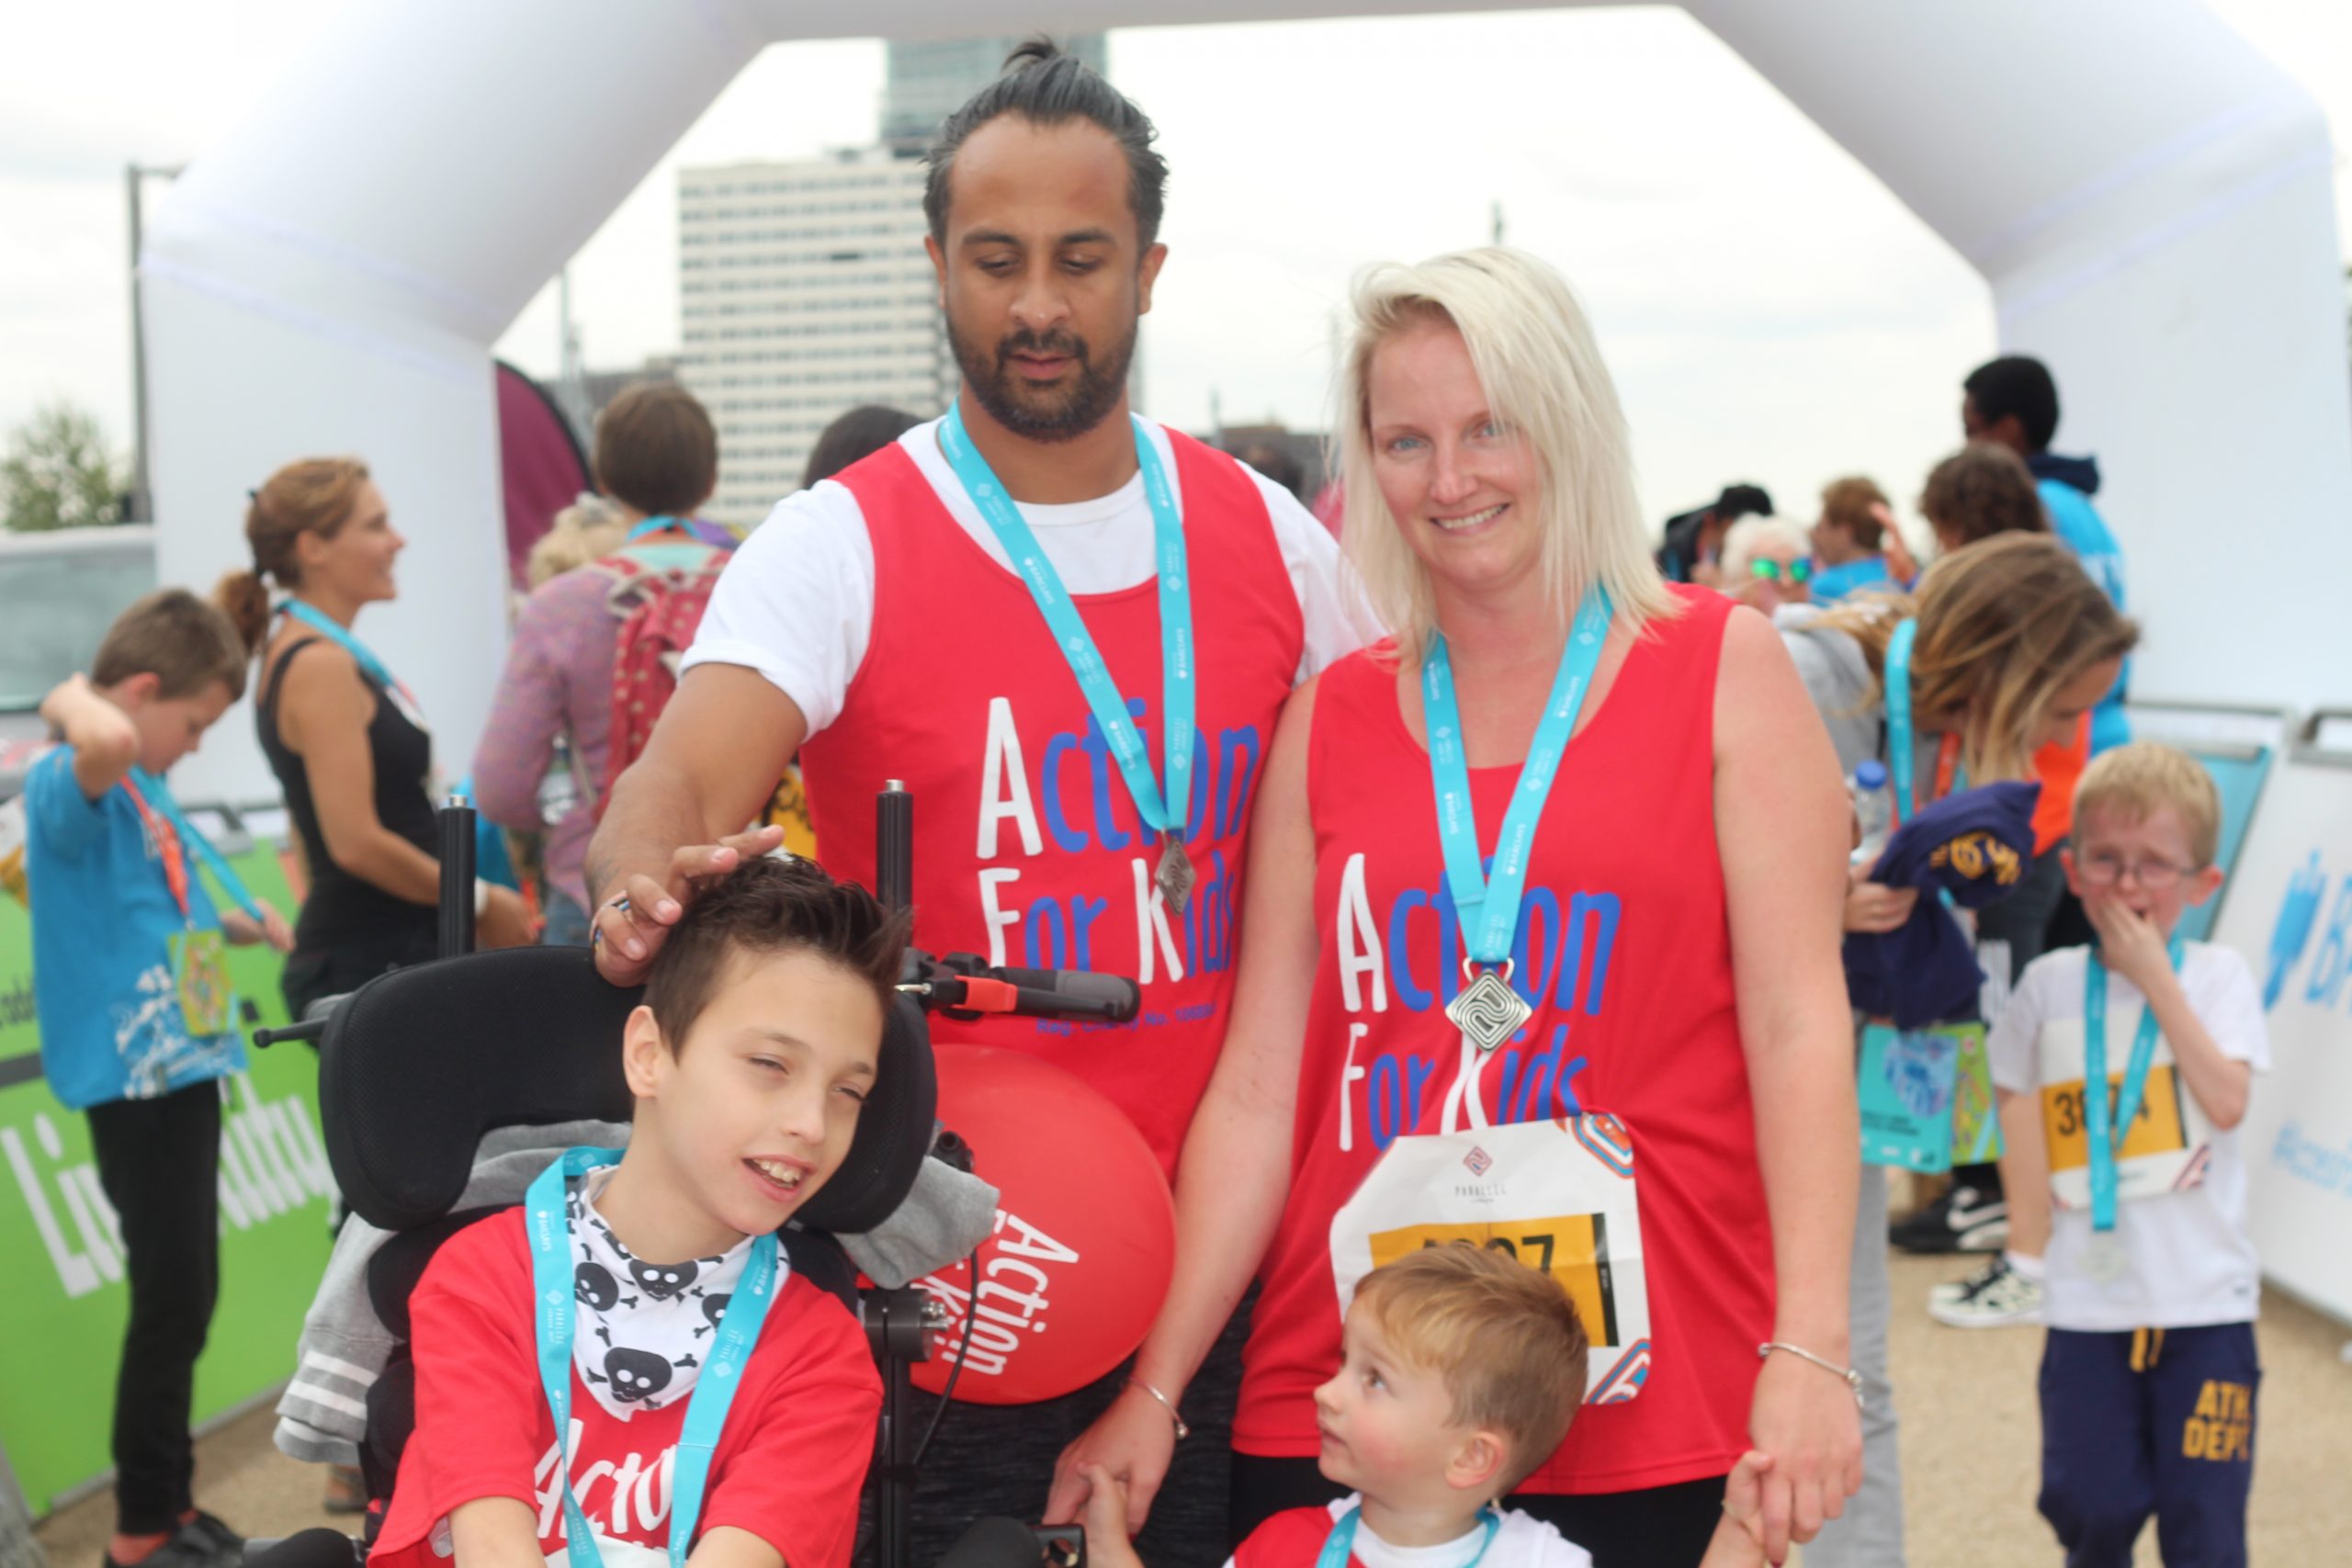 Family wearing red AFK vests and medals at Parallel London finish line